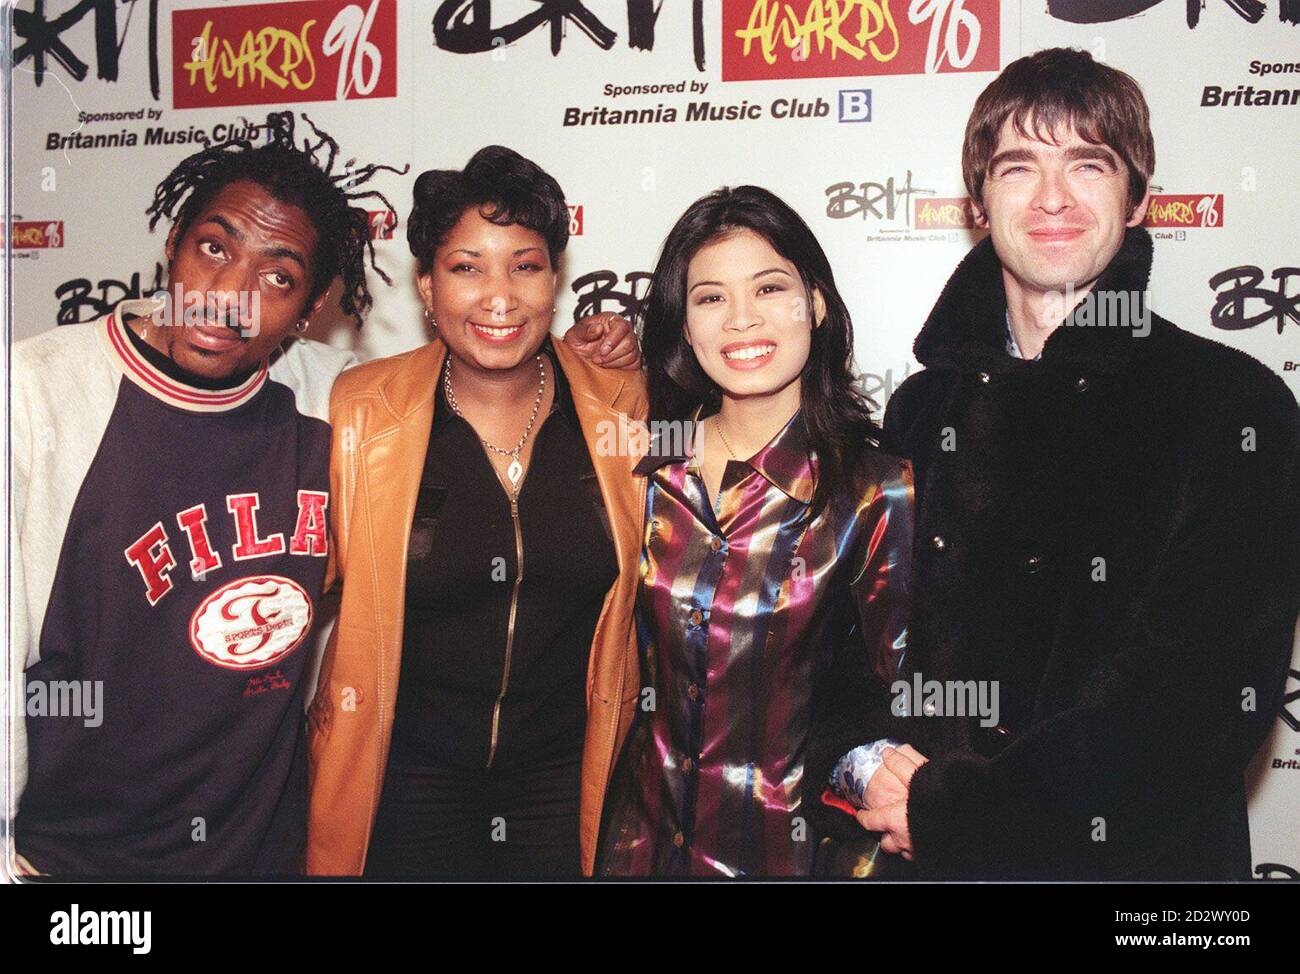 Pop stars (l/r) Coolio, Shara Nelson, Vanessa Mae and Noel Gallagher of Oasis, in London today (Monday), for the  Brit Awards Nominations. The awards ceremony will be staged at Earls Court on Monday, Feb 19, 1996. Photo by Fiona Hanson. Stock Photo